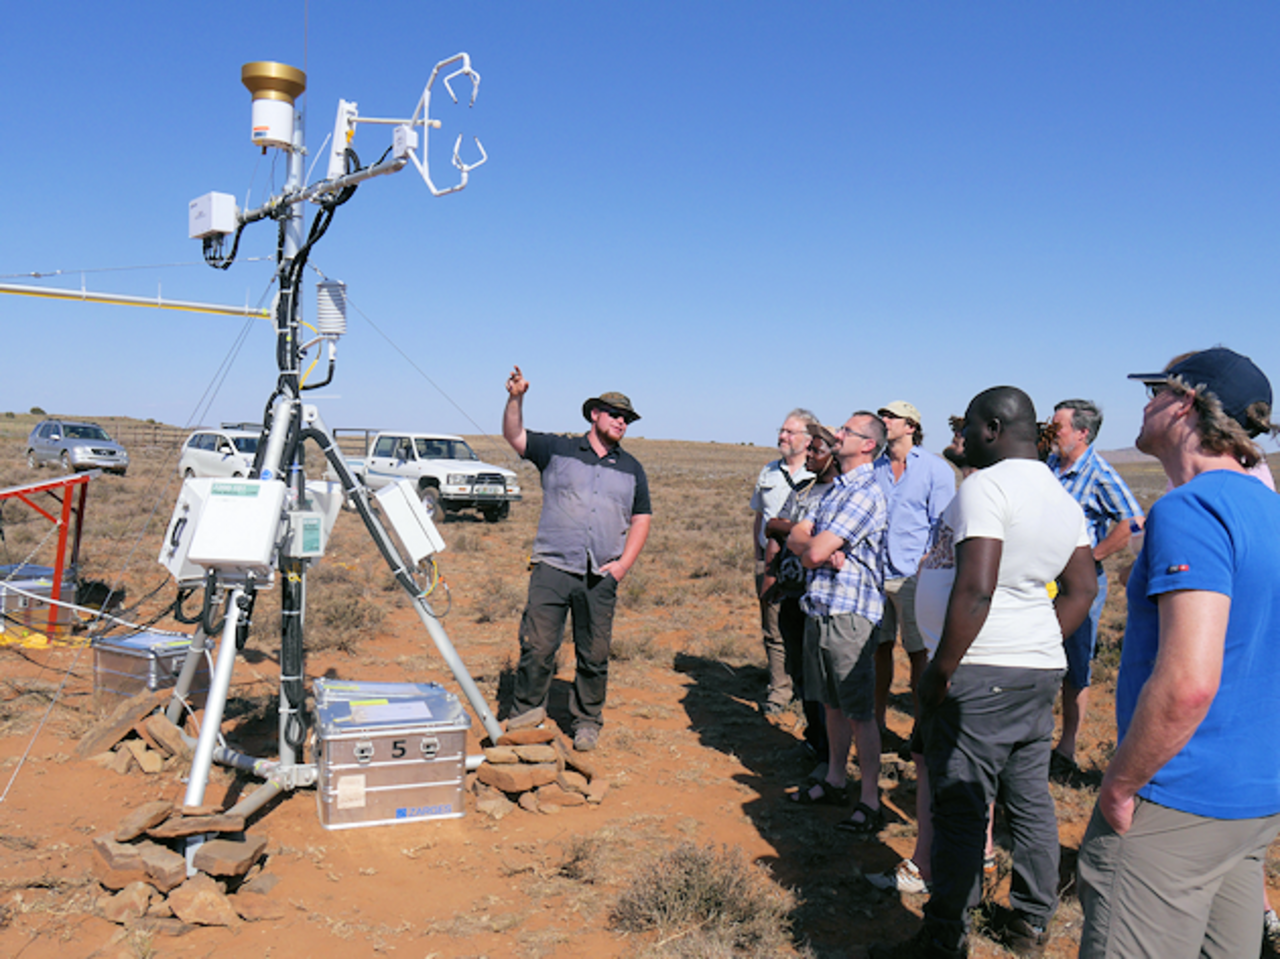 Setting up an eddy-covariance tower for the measurement of carbon dioxide and water vapor fluxes at a pasture site near Middelburg, Eastern Cape, Karoo, South Africa